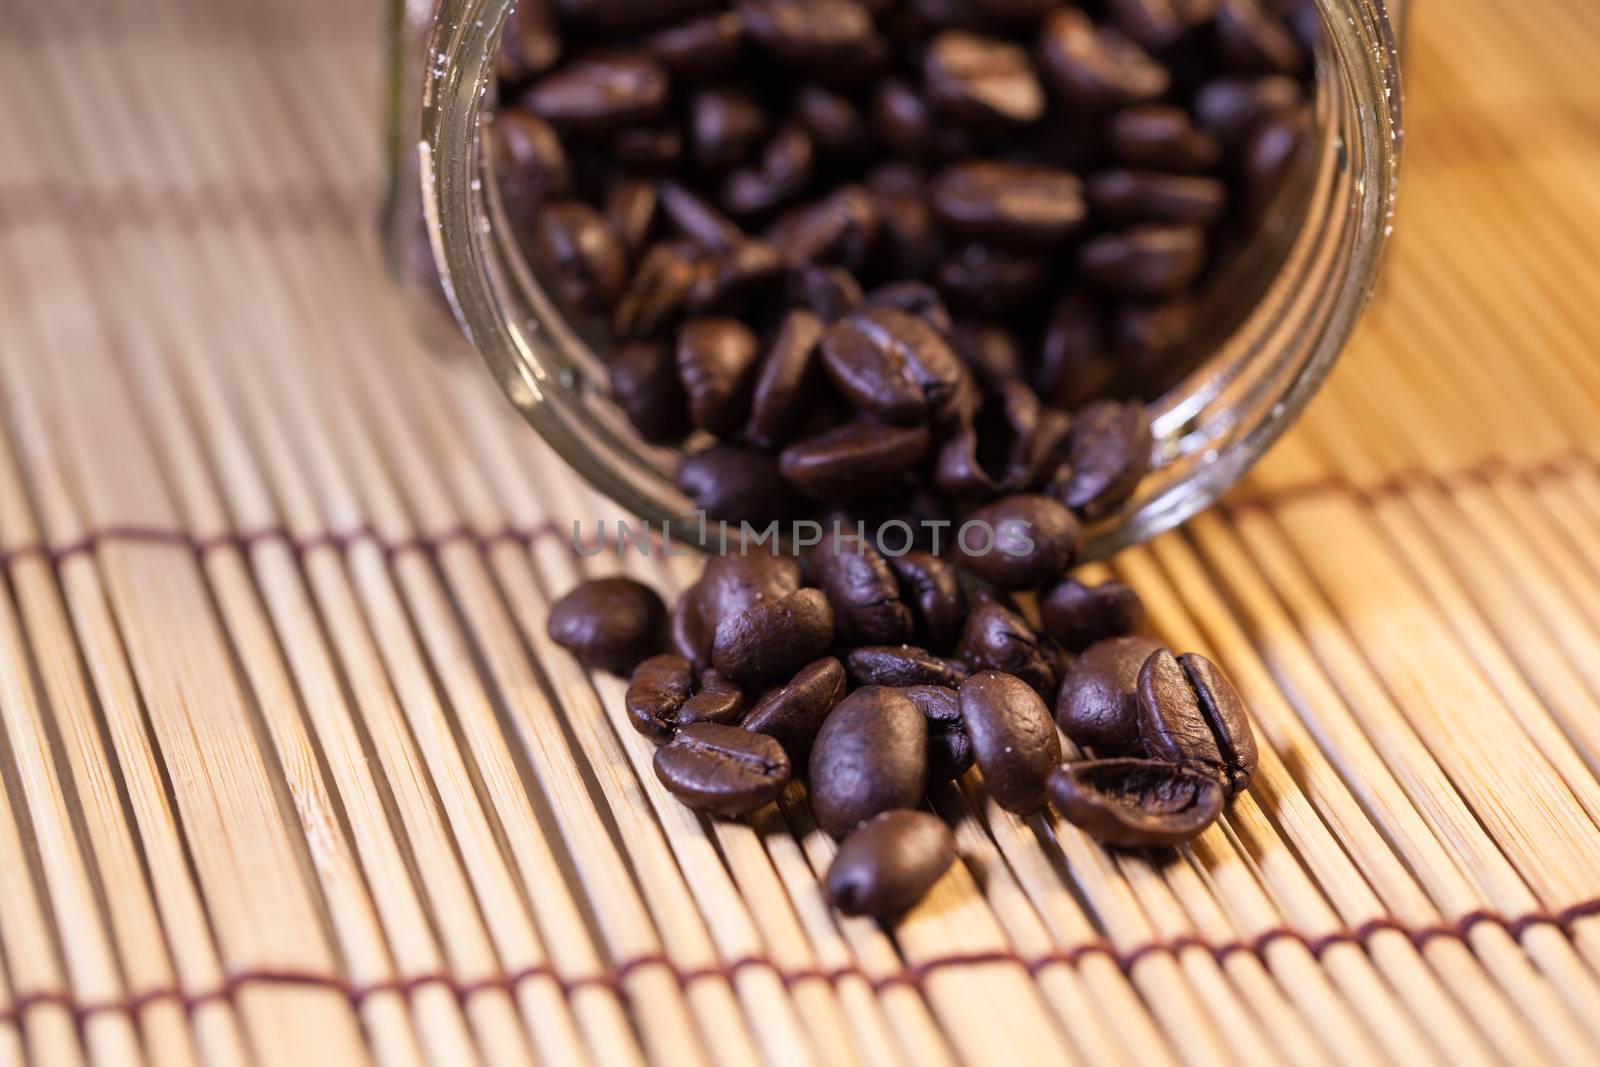 Coffee beans in a glass jar by a454